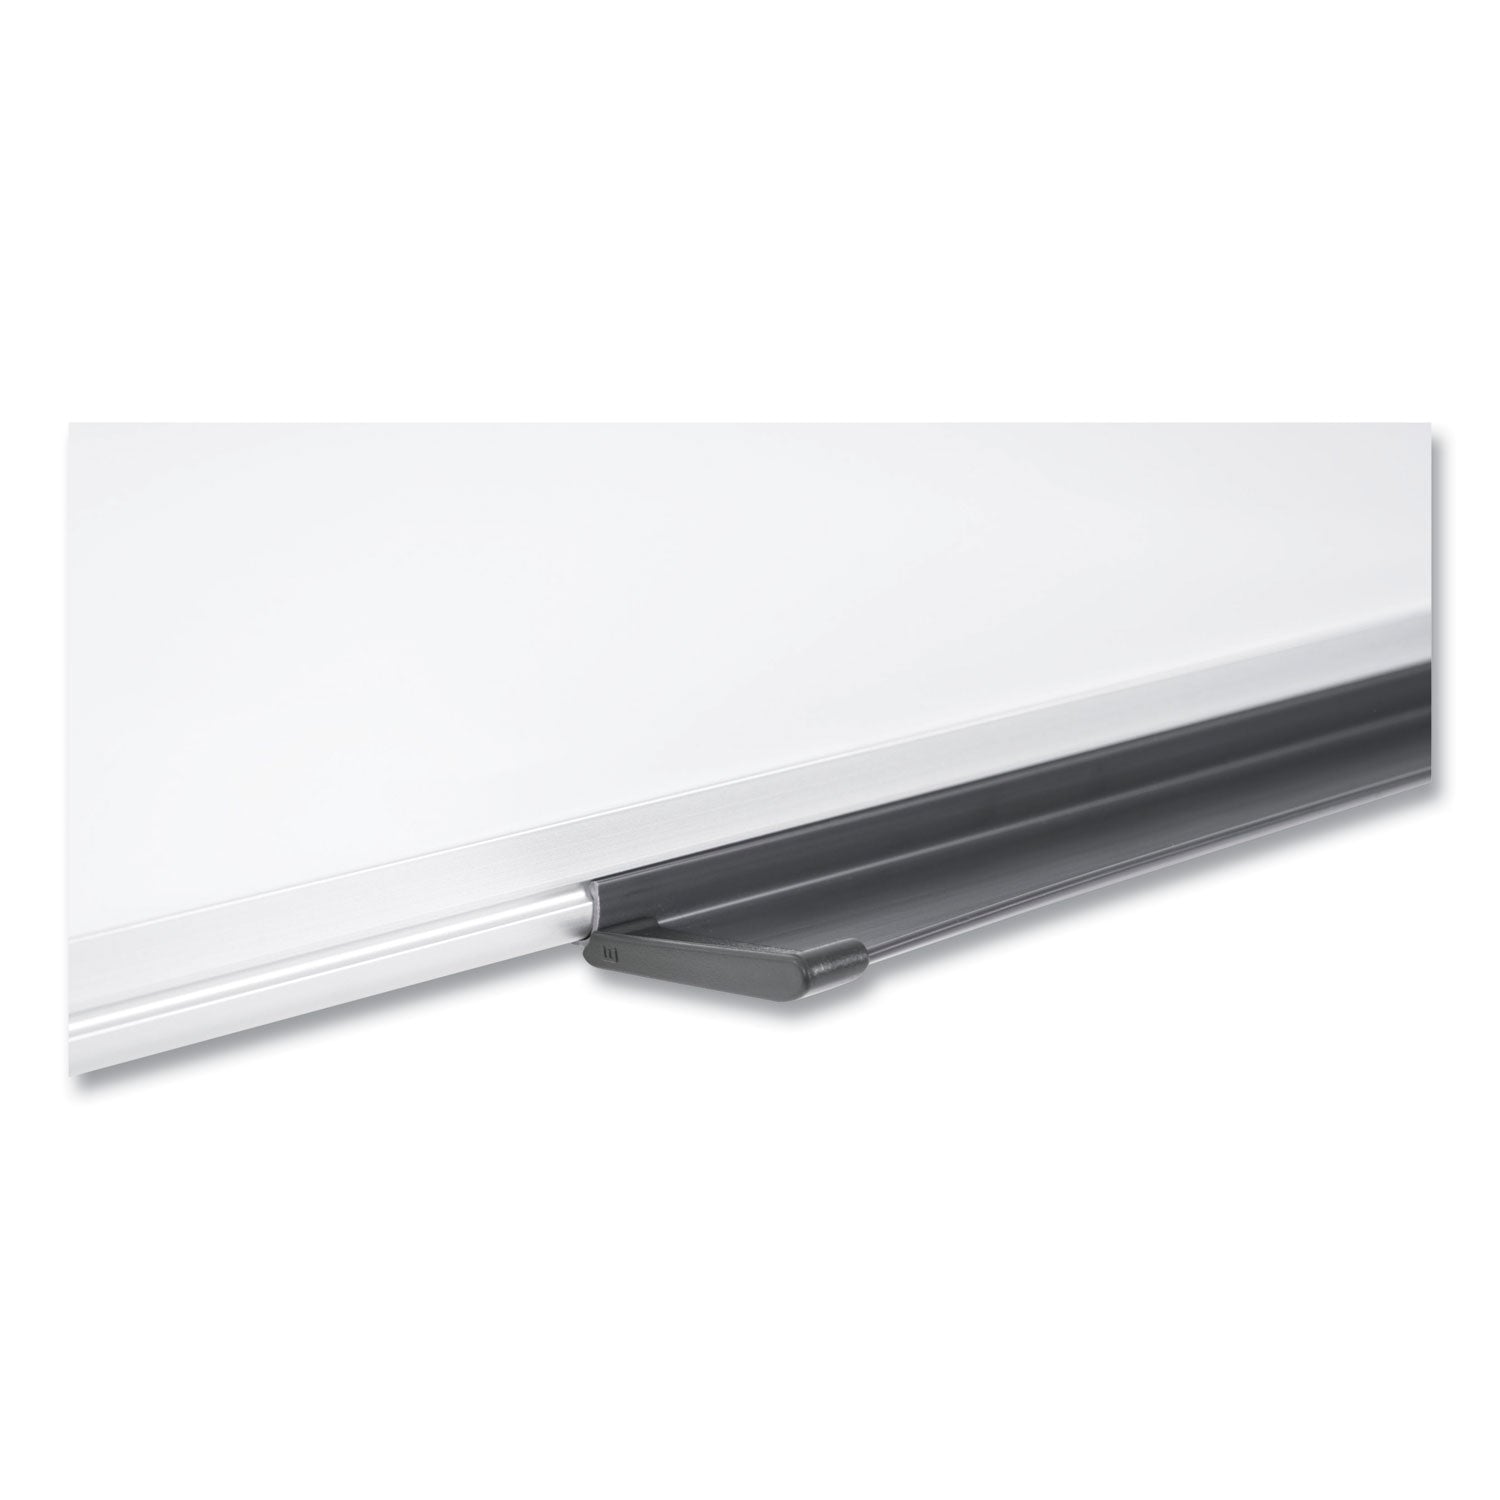 Value Lacquered Steel Magnetic Dry Erase Board, 96 x 48, White Surface, Silver Aluminum Frame - 